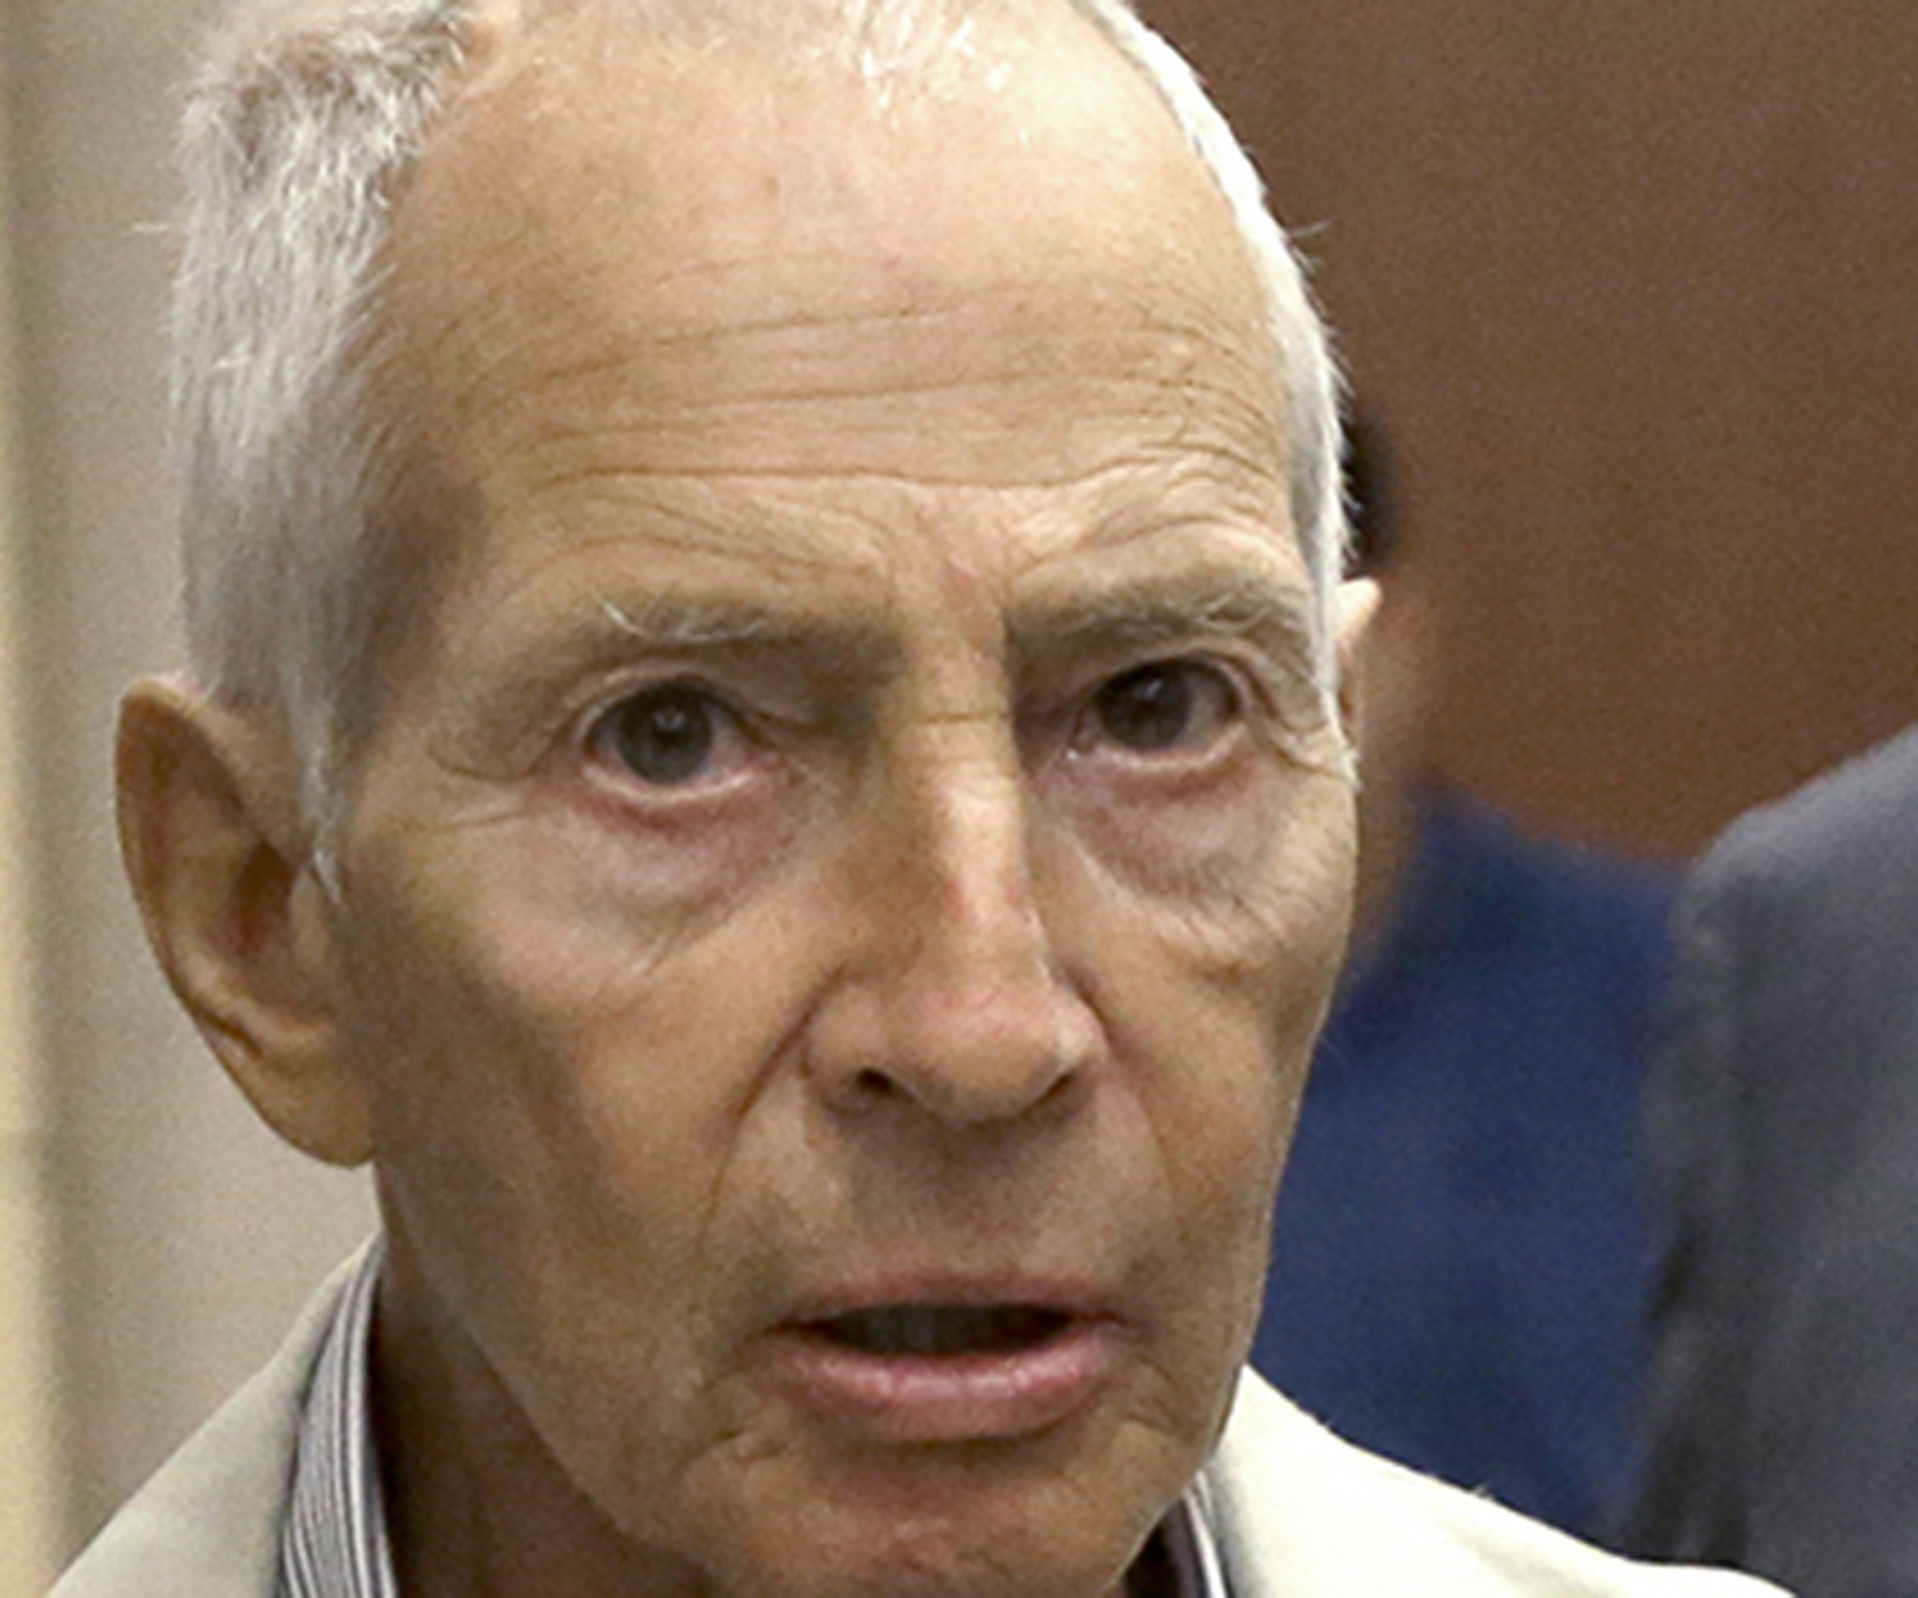 Robert A Durst was arrested in New Orleans on an extradition warrant to Los Angeles on March 14.